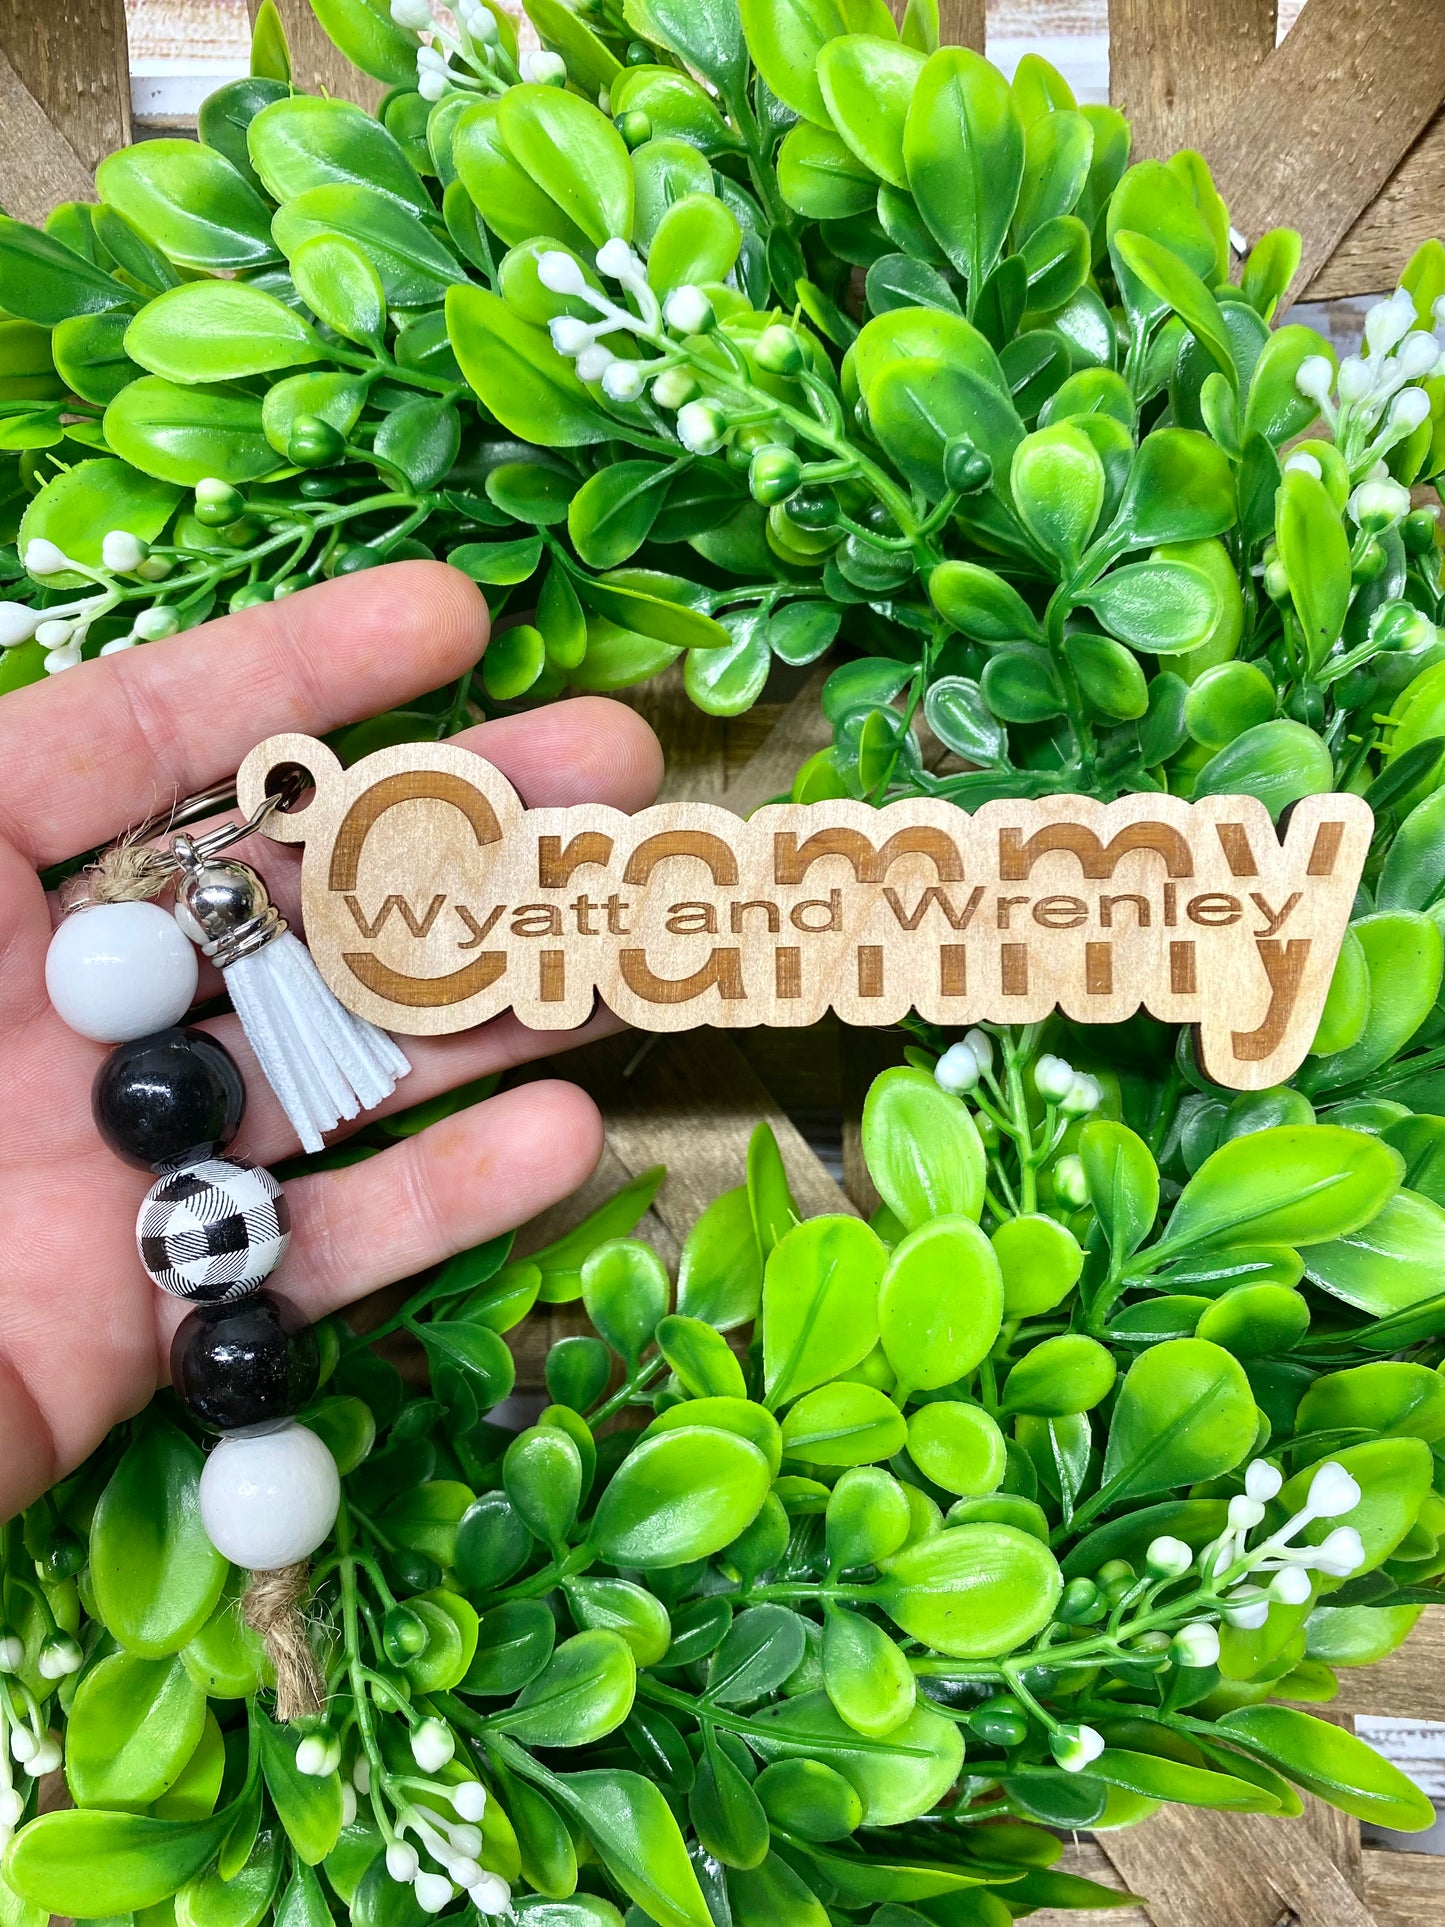 Grammy Personalized Keychain with Kids Names, Wood Engraved Grammy Keychain, Mother's Day Gift from Grandkids, Grandma Gift